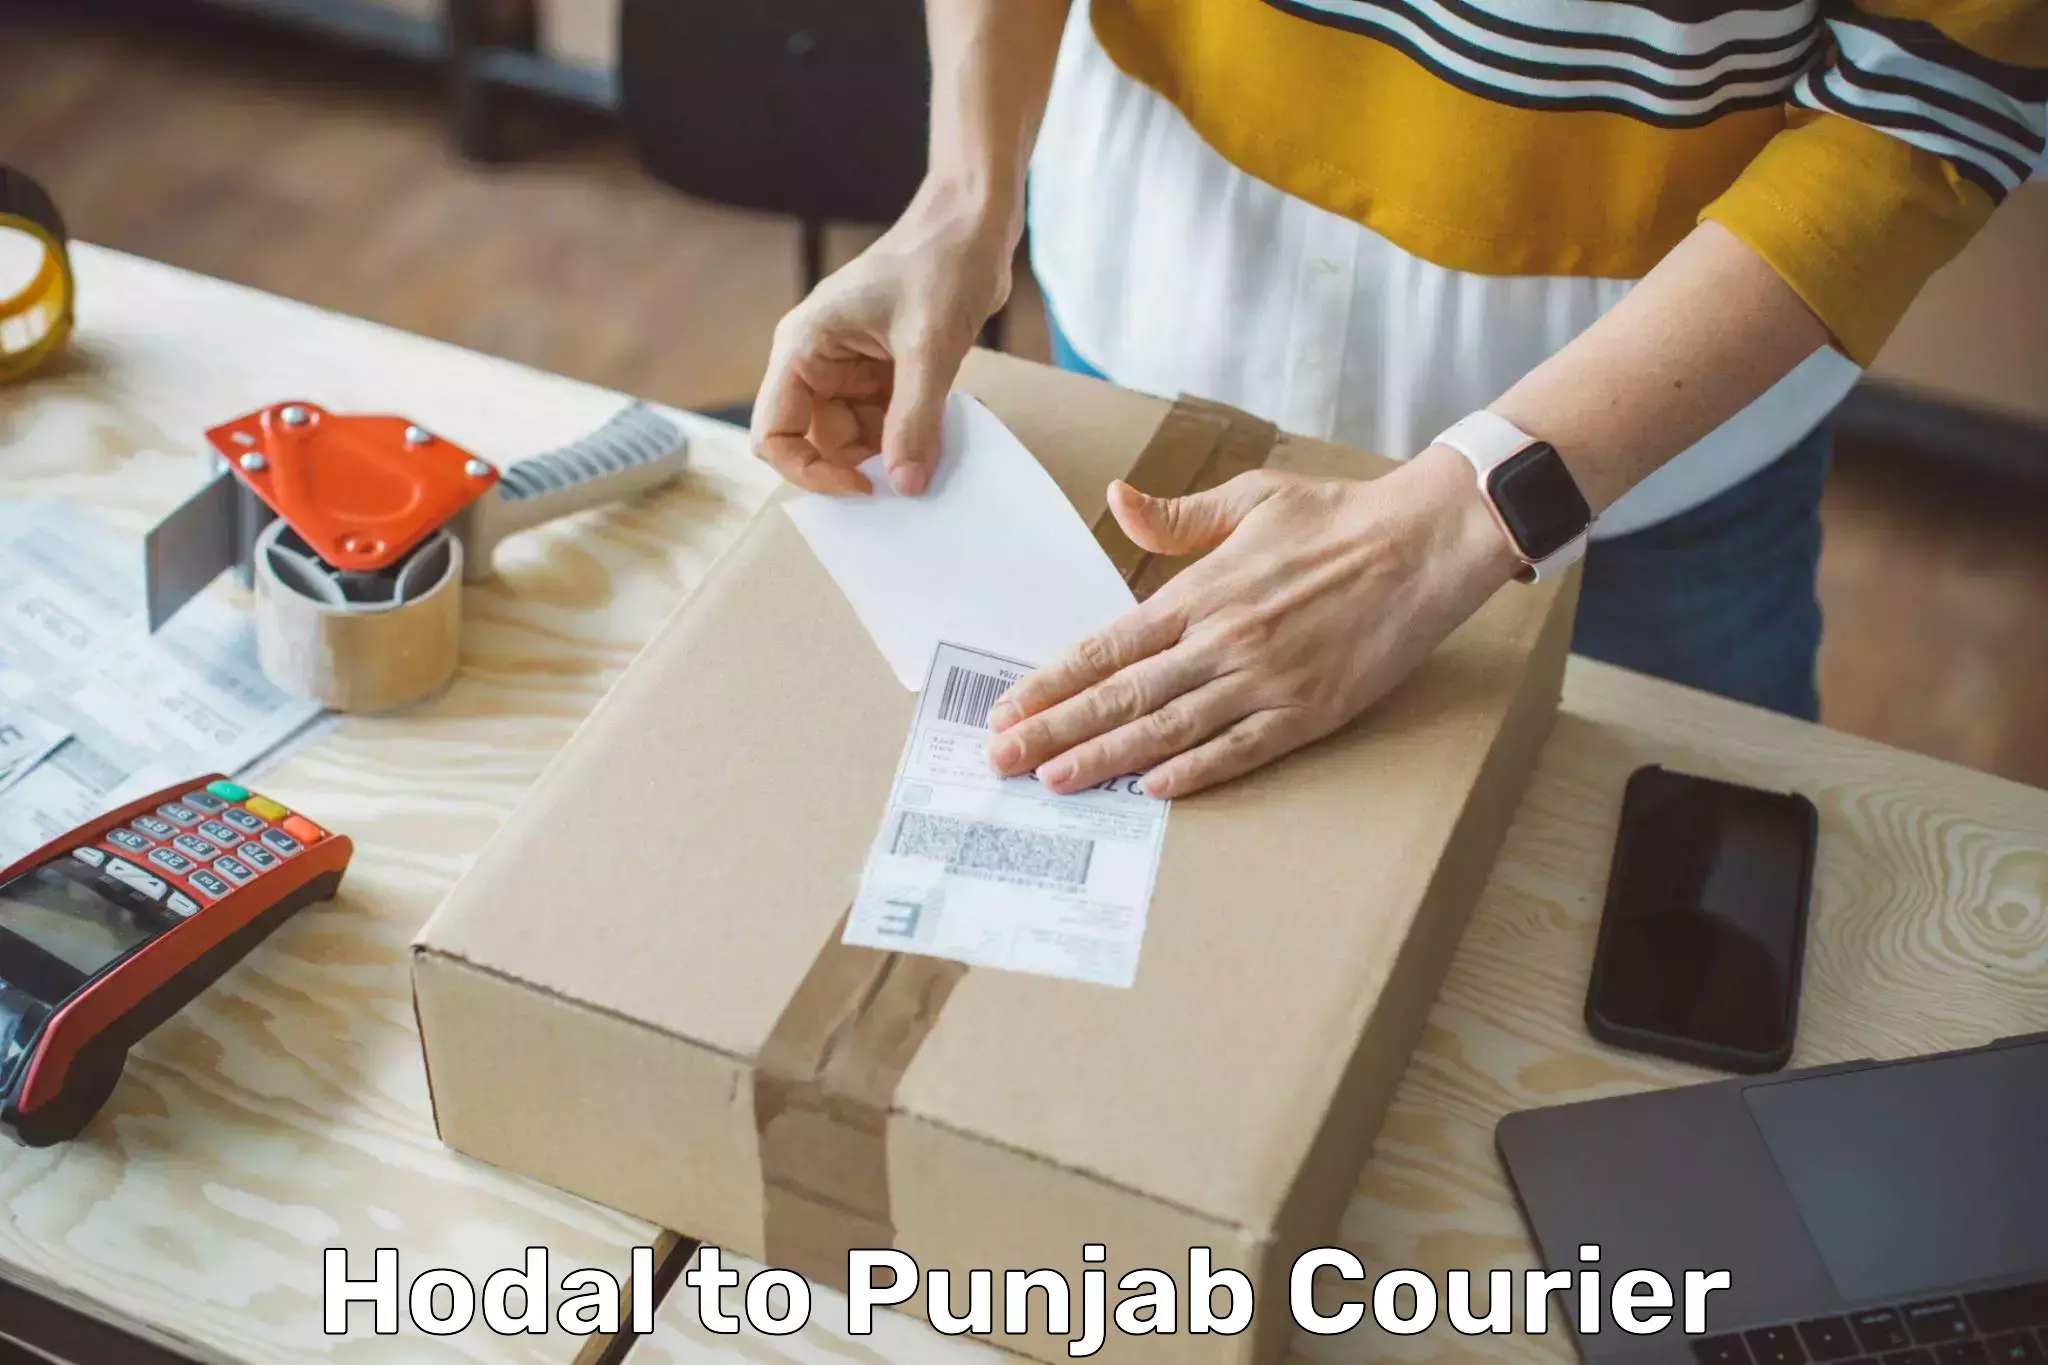 Specialized courier services in Hodal to Malerkotla